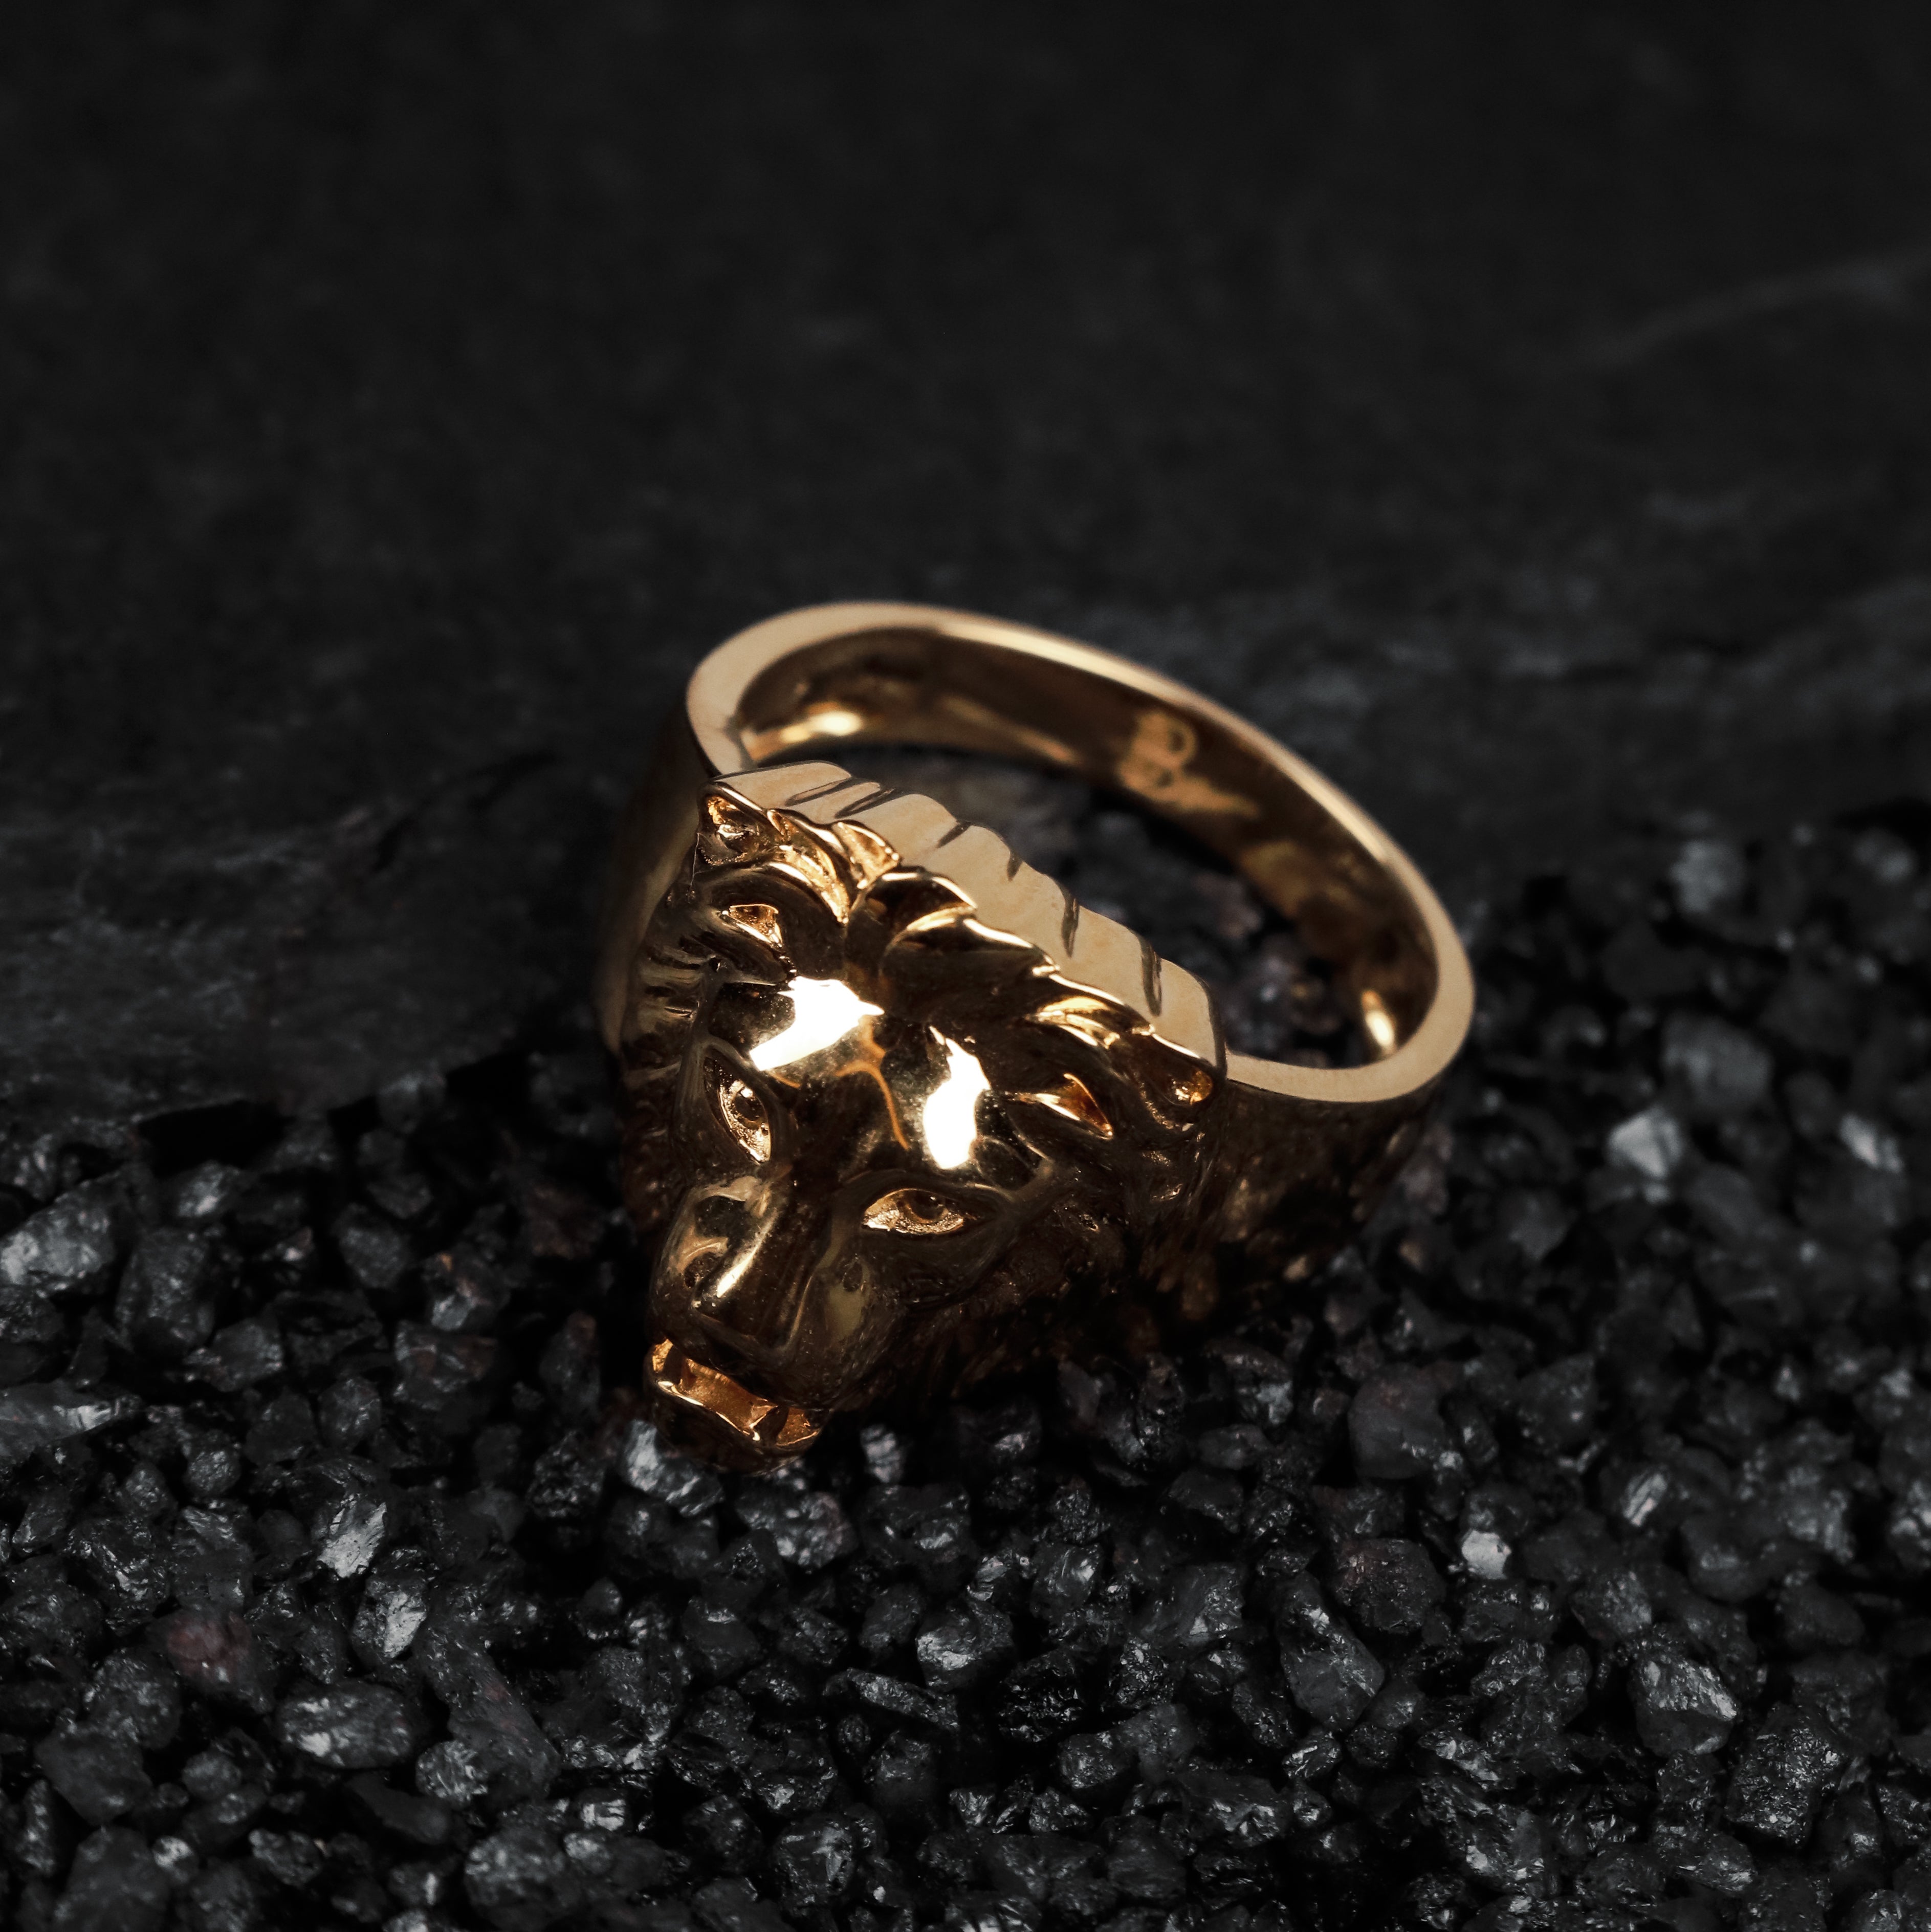 Löwe - Handcrafted - 18 kt. Gold - Ring - 0.25 ct Diamond - 3 D shape -  12.3 grams - size changeable between 54-59 - Catawiki